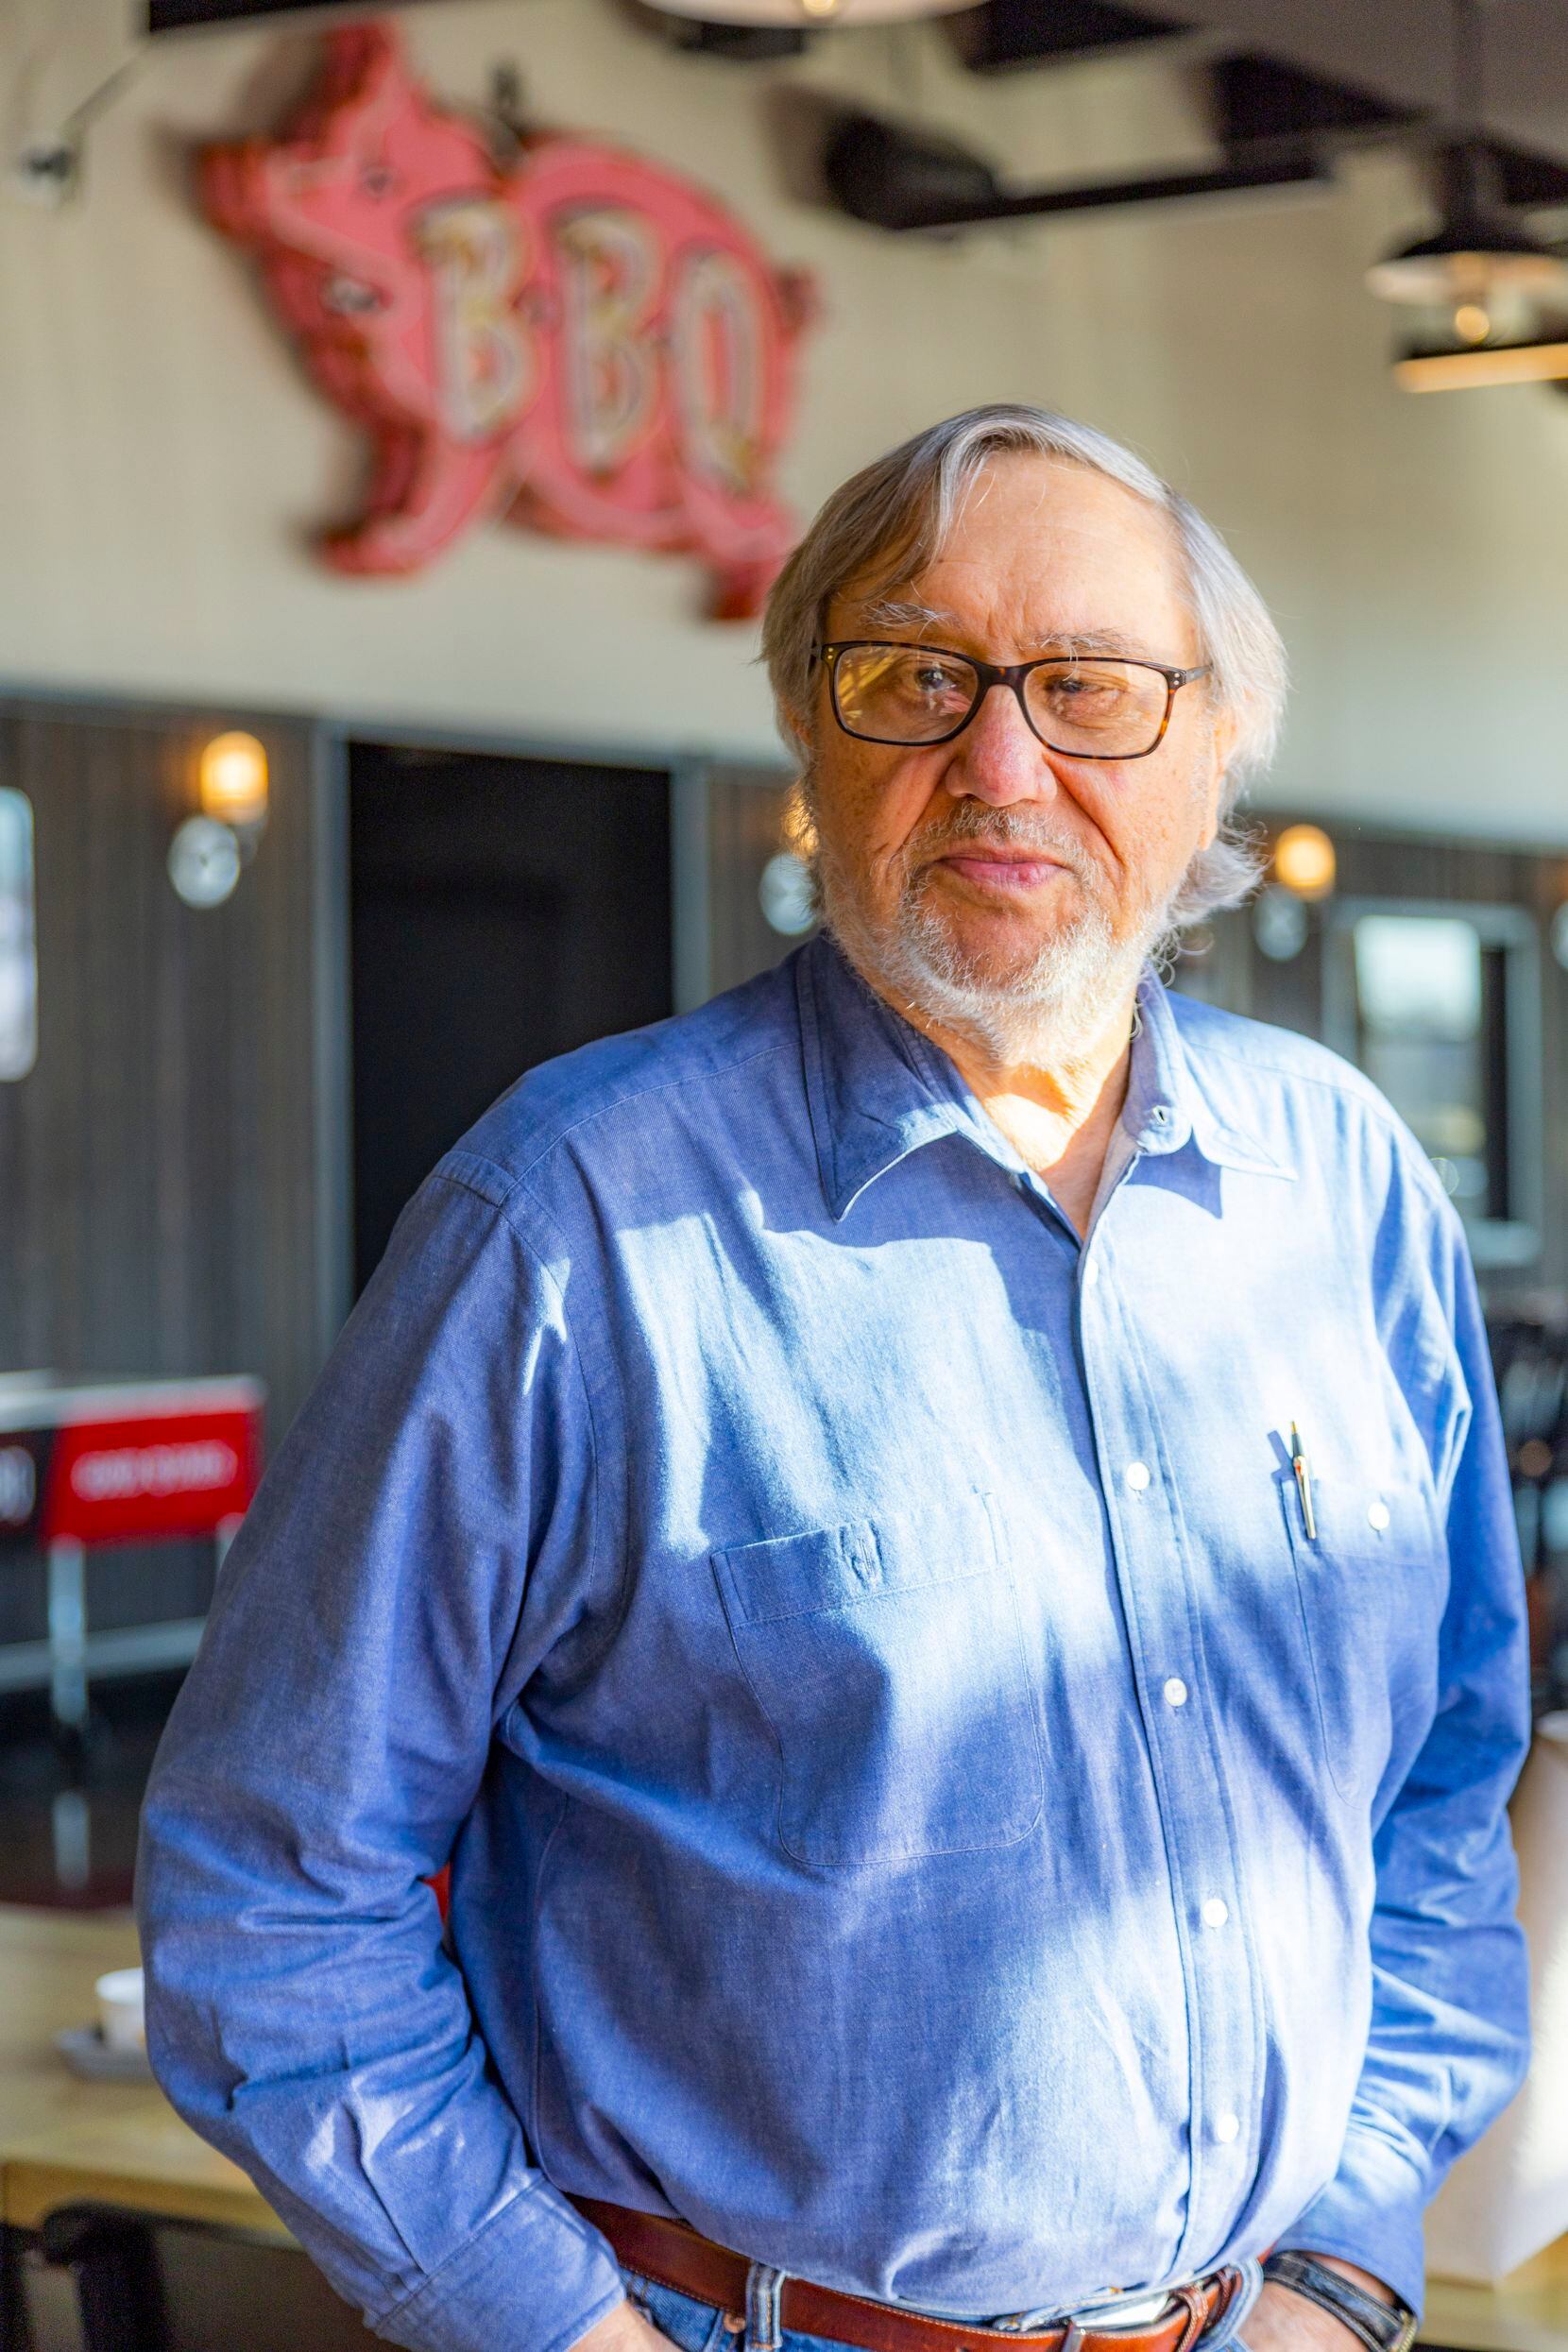 Larry Lavine, who co-created Chili's in the mid-1970s, is opening his newest restaurant,...